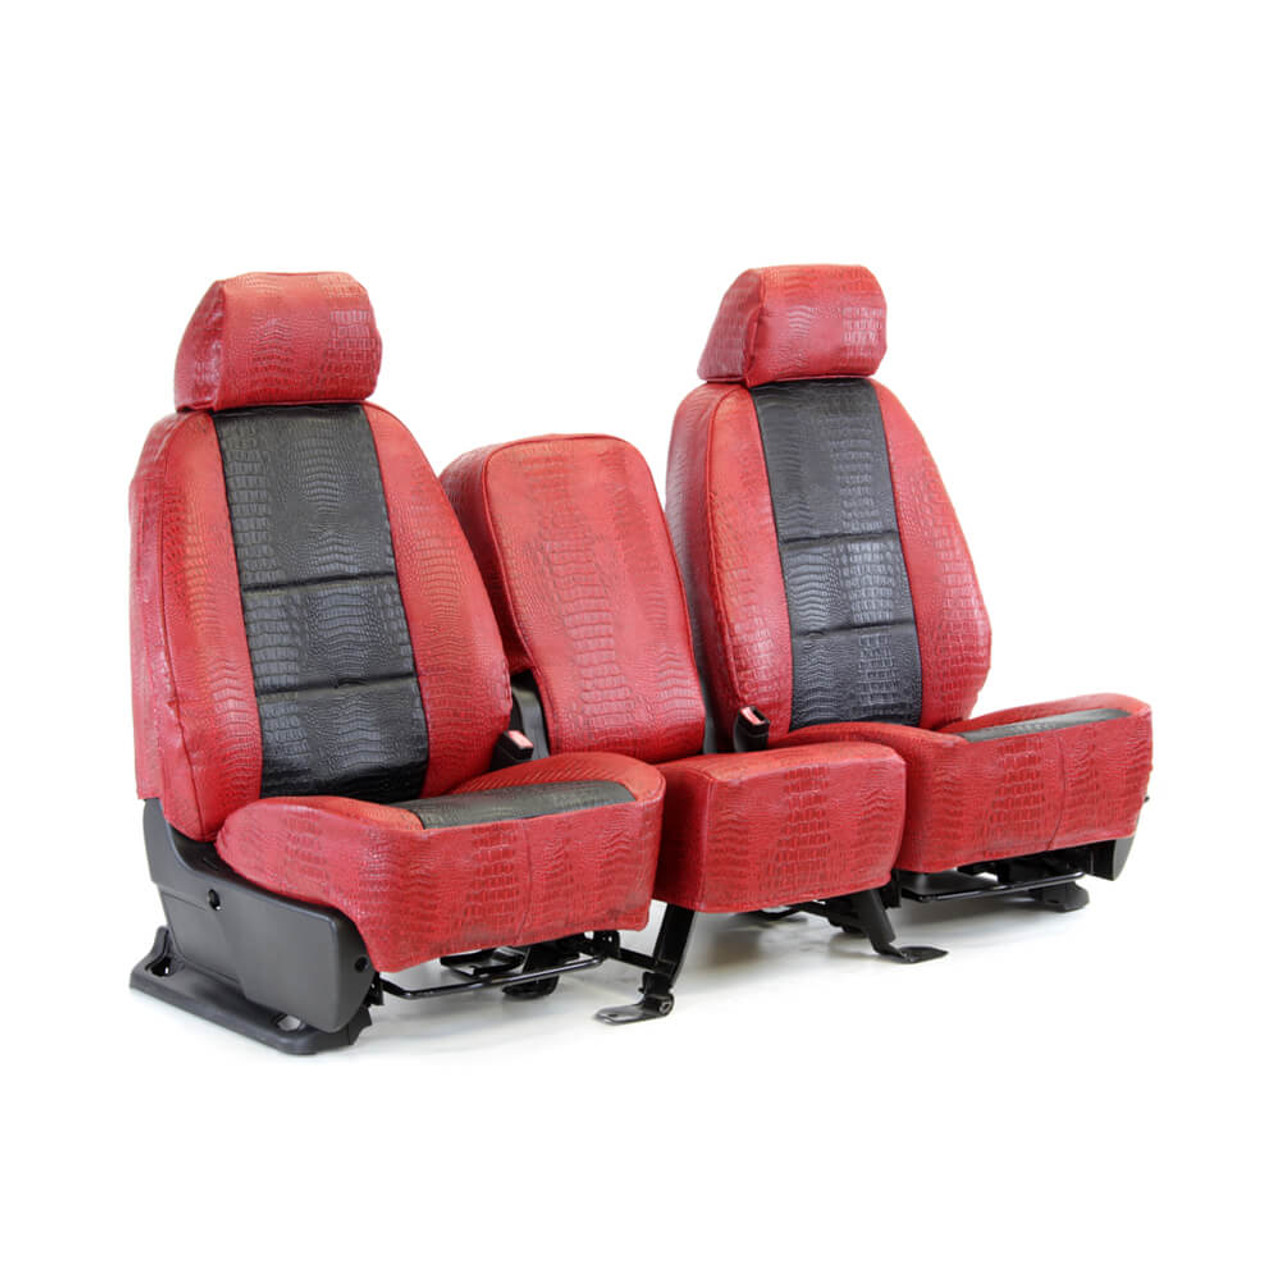 Exotic Alligator Seat Covers | Unique Faux Leather Seat Covers | SALE